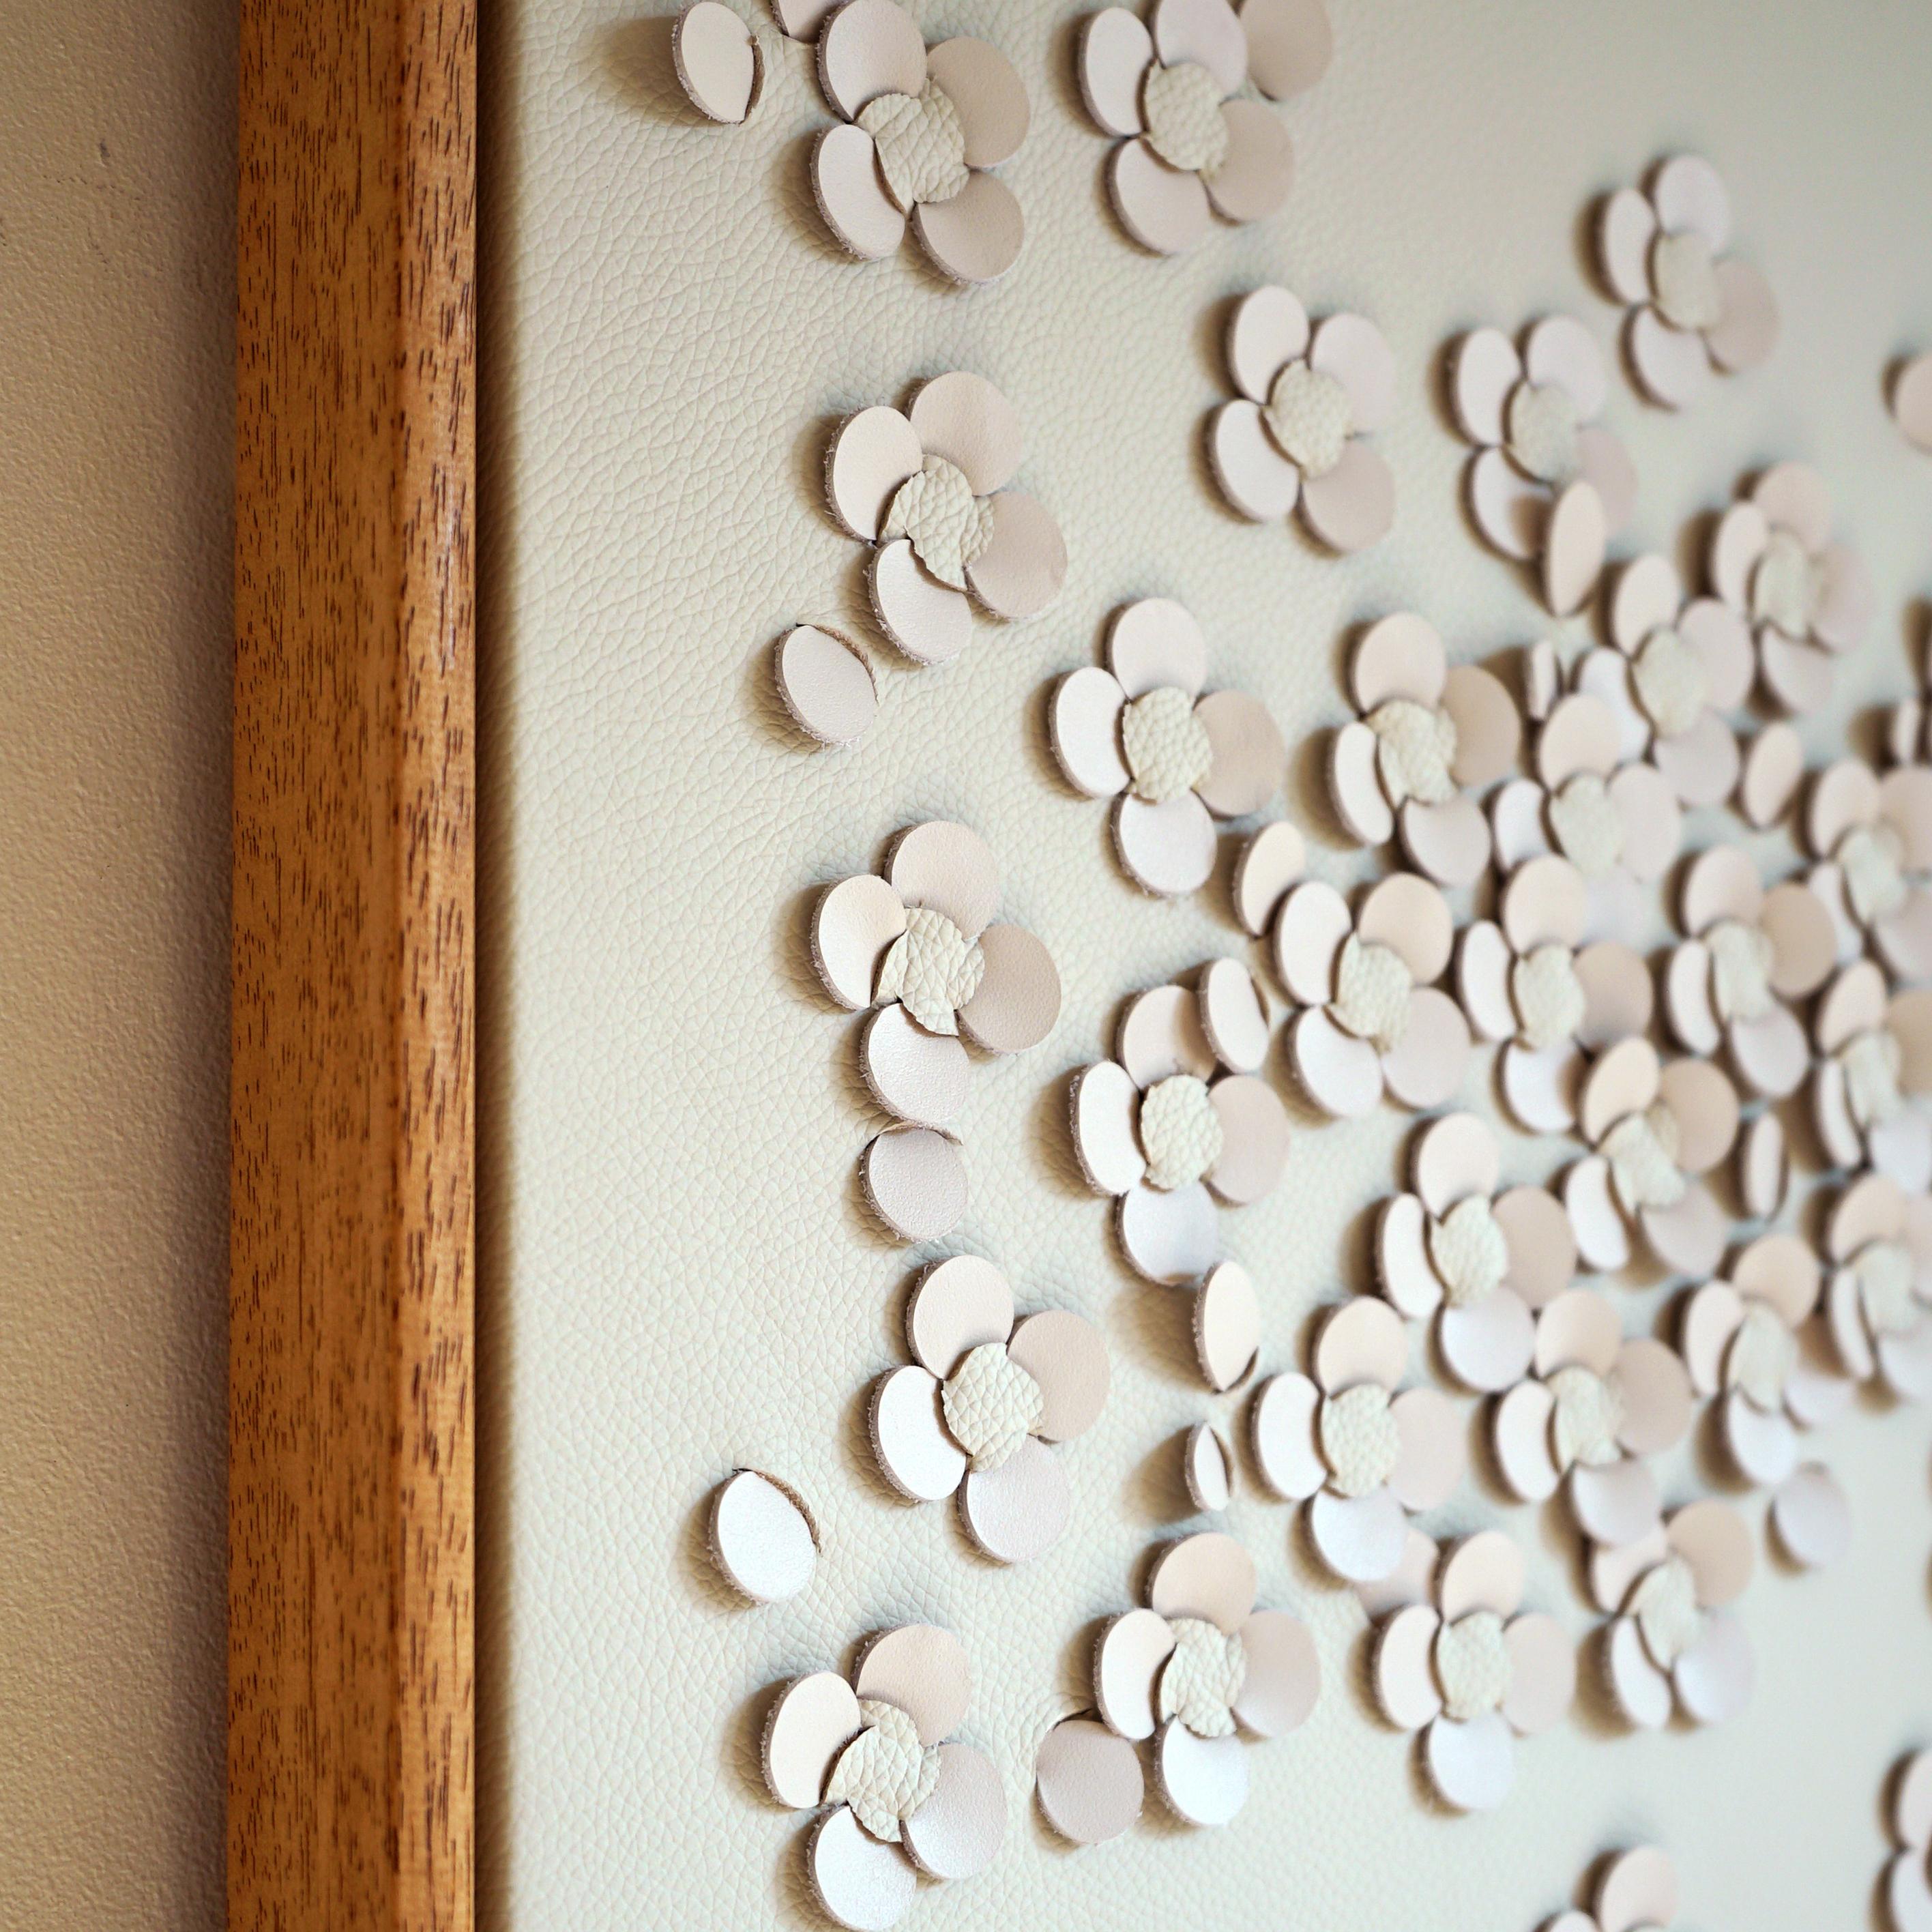 Blossom, a Piece of 3D Sculptural Cream Leather Wall Art In New Condition For Sale In Margate, GB